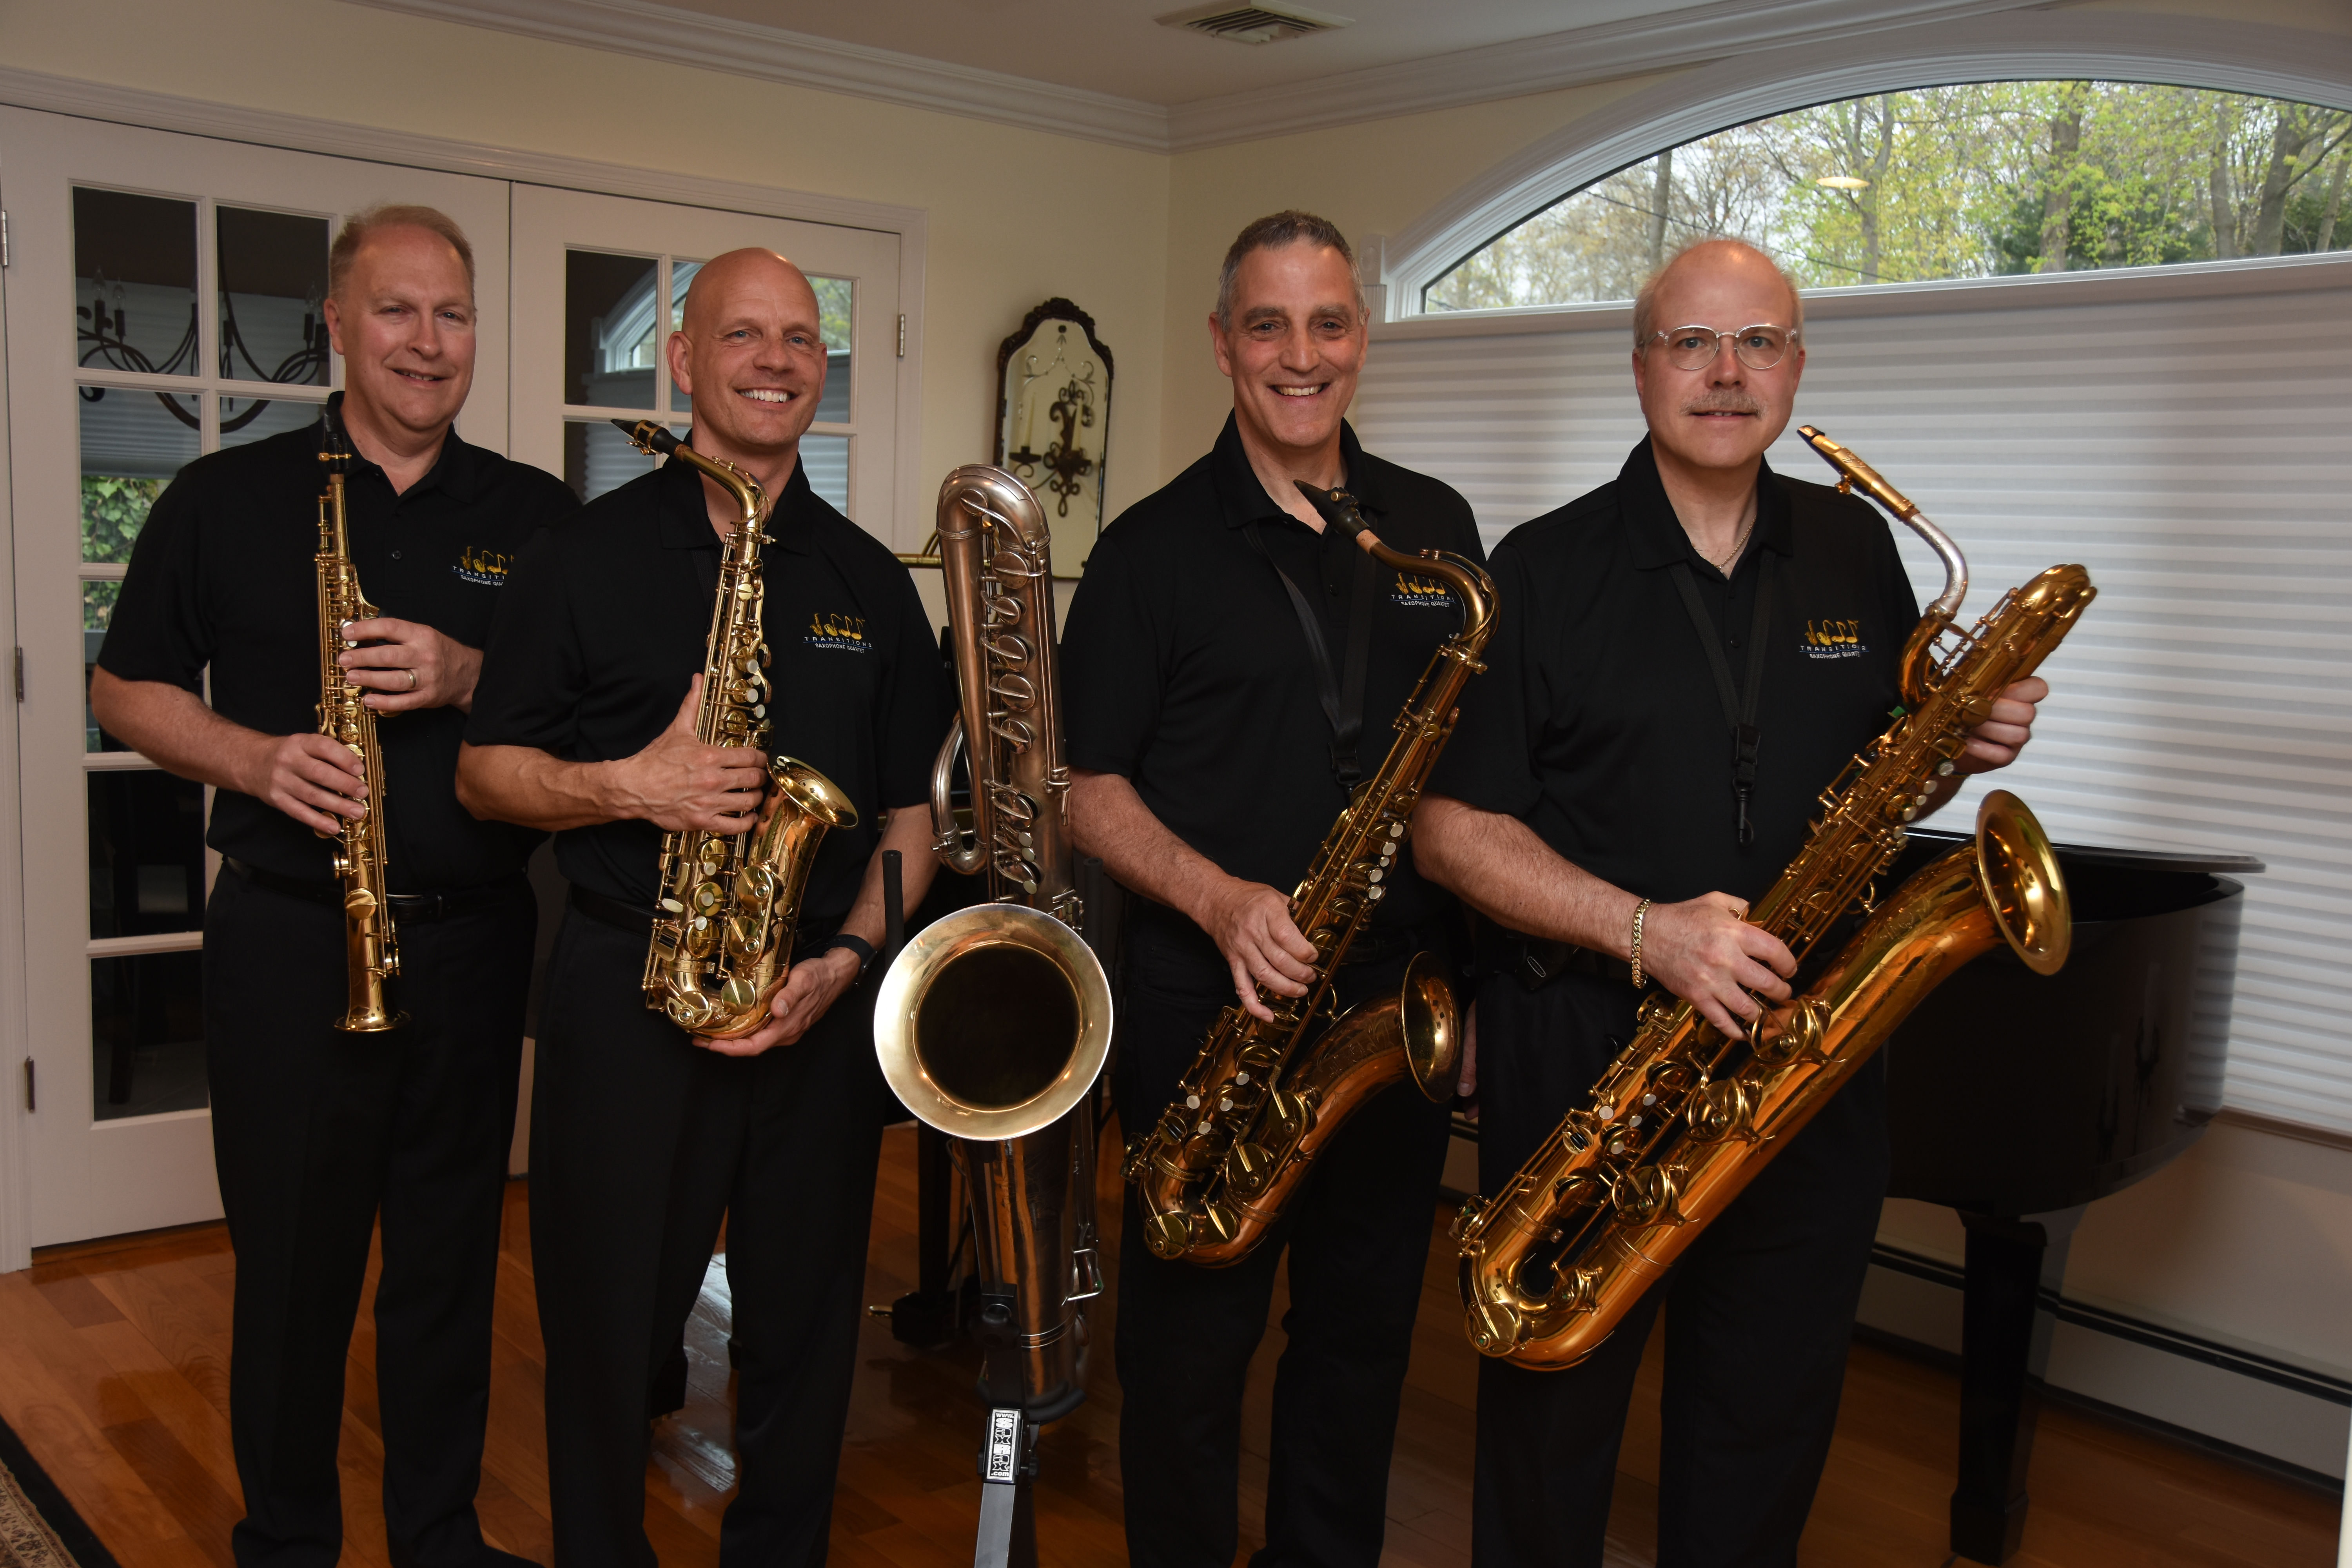 Color photo of four members of the Transitions Saxophone Quartet holding their instruments.